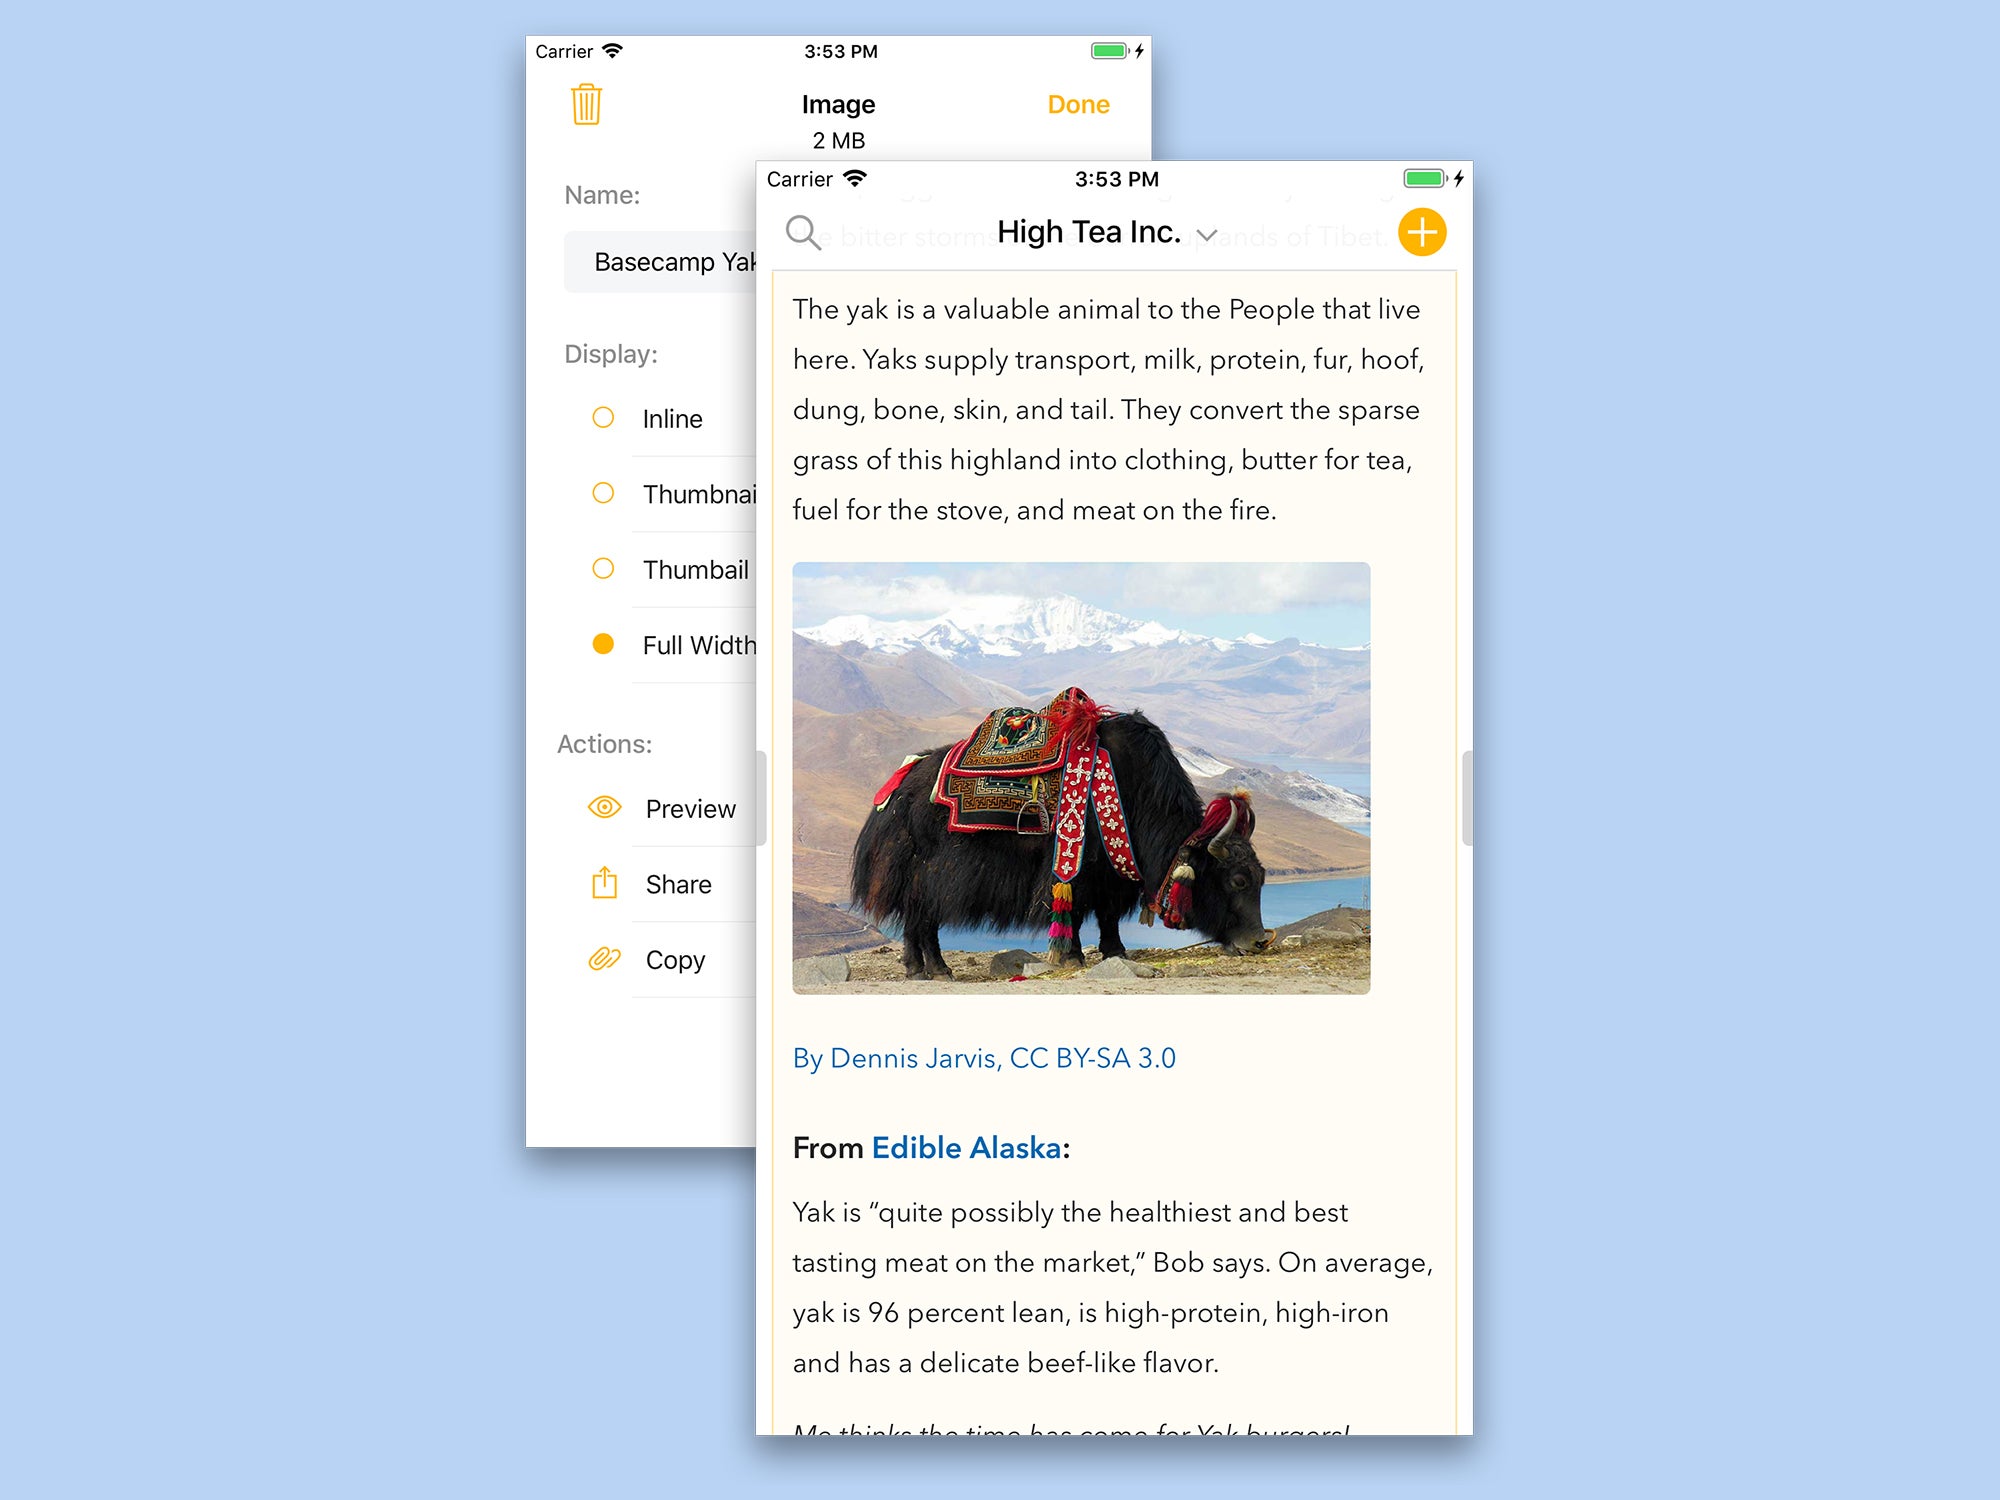 The Agenda note-taking app as it appears on your phone screen.